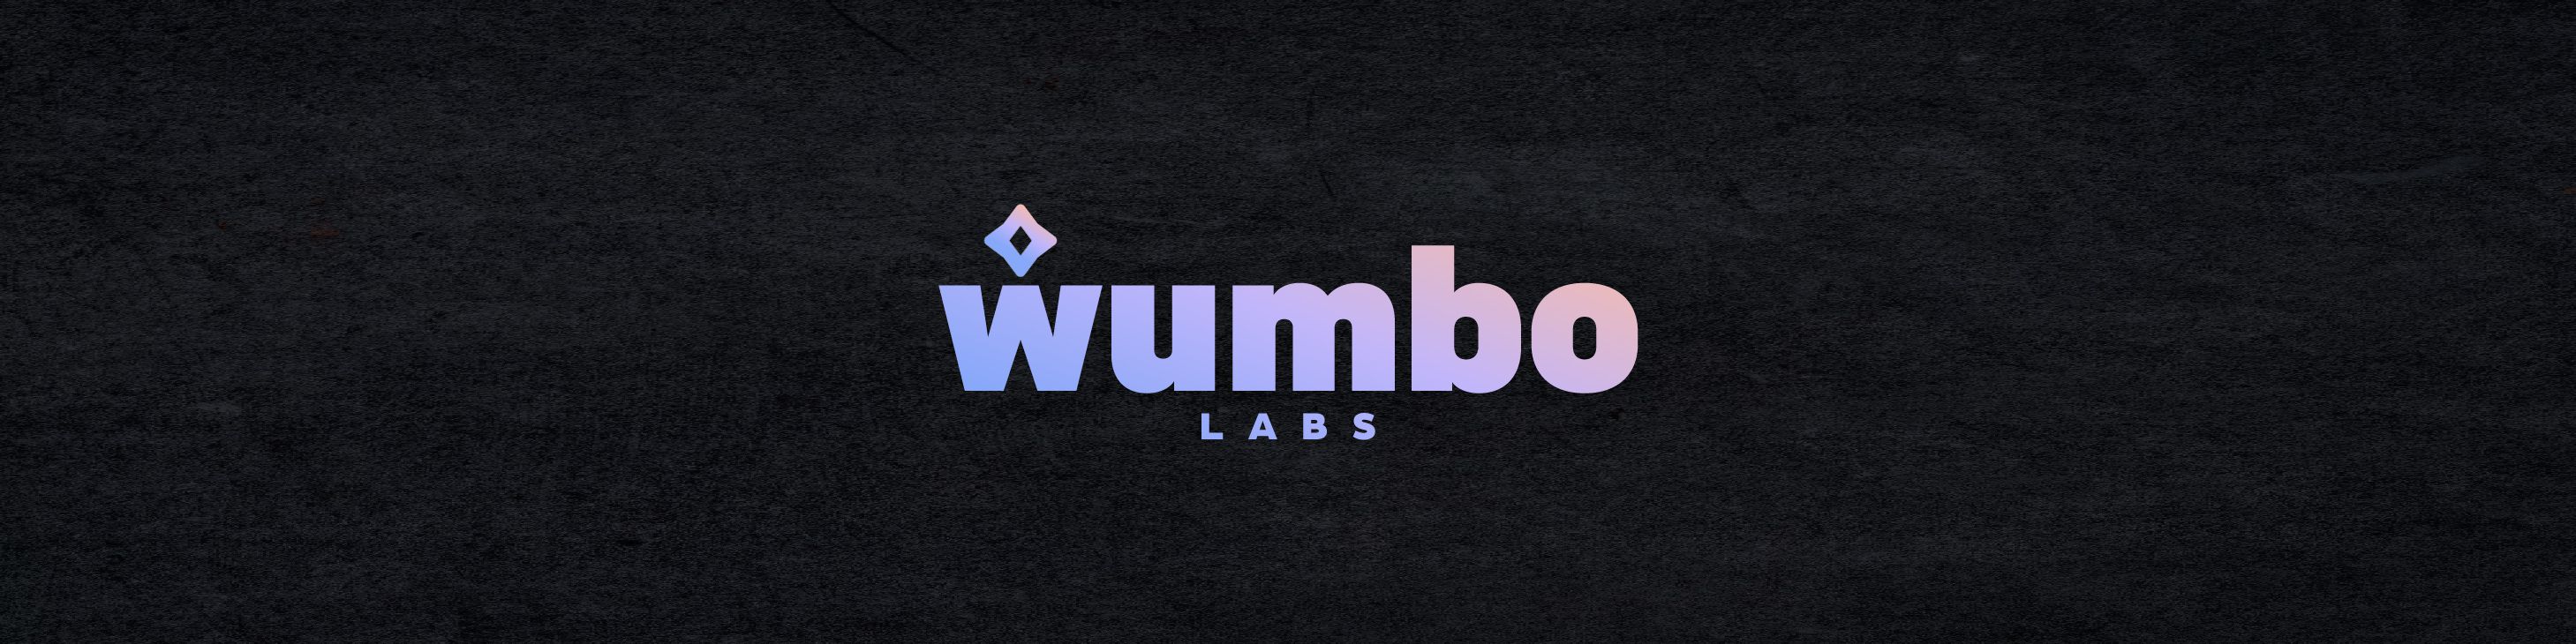 WumboLabs 横幅